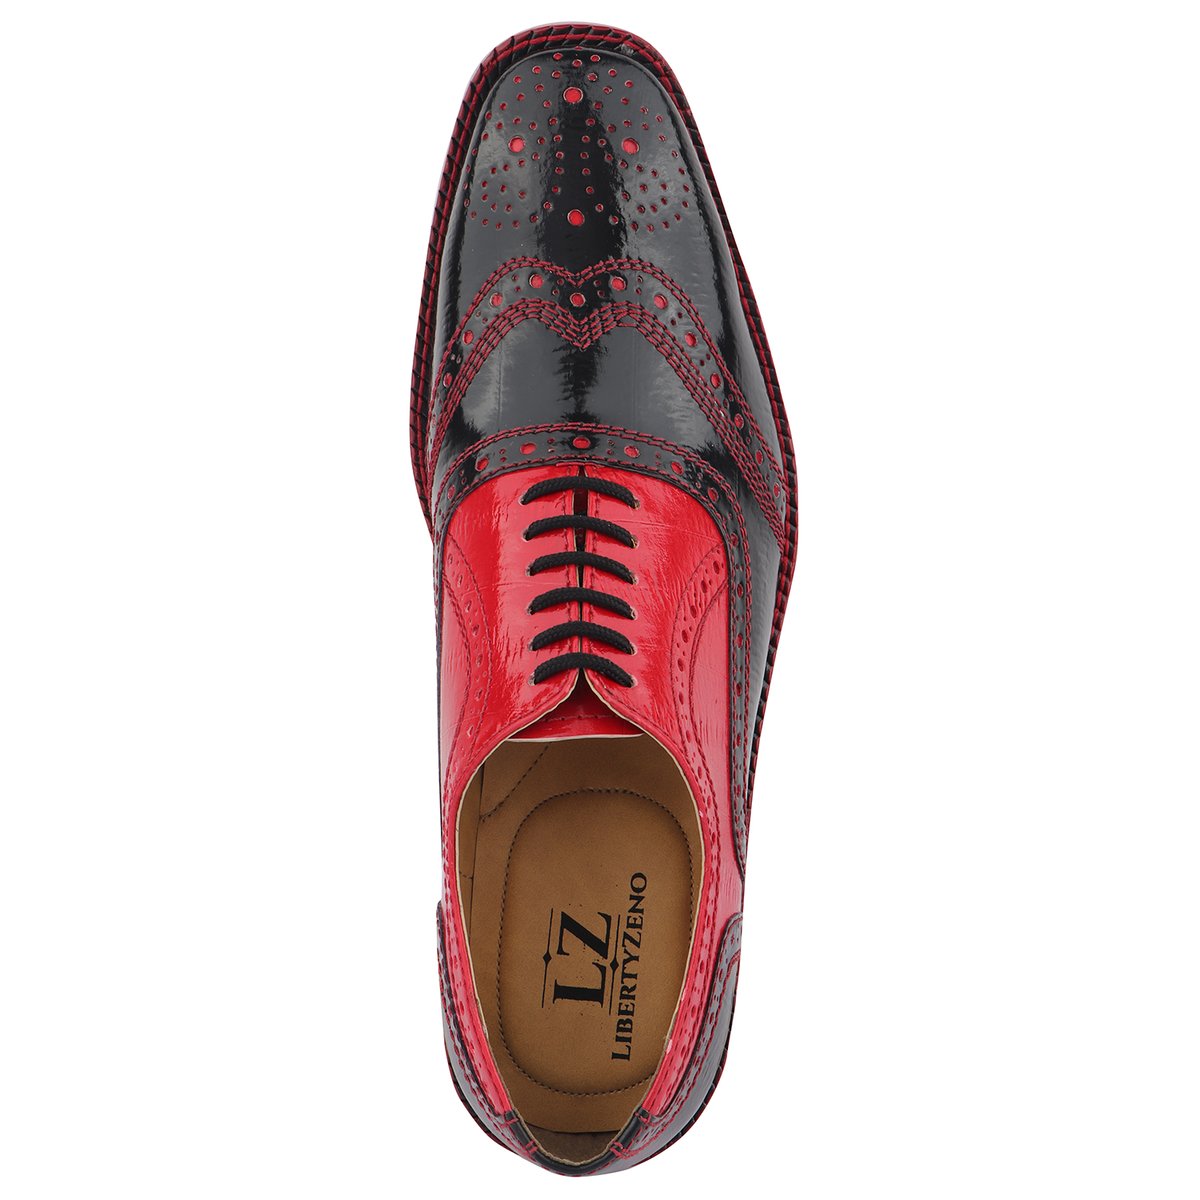 LIBERTYZENO Tremont Man Made Oxford Style Dress Shoes - Red - 10.5